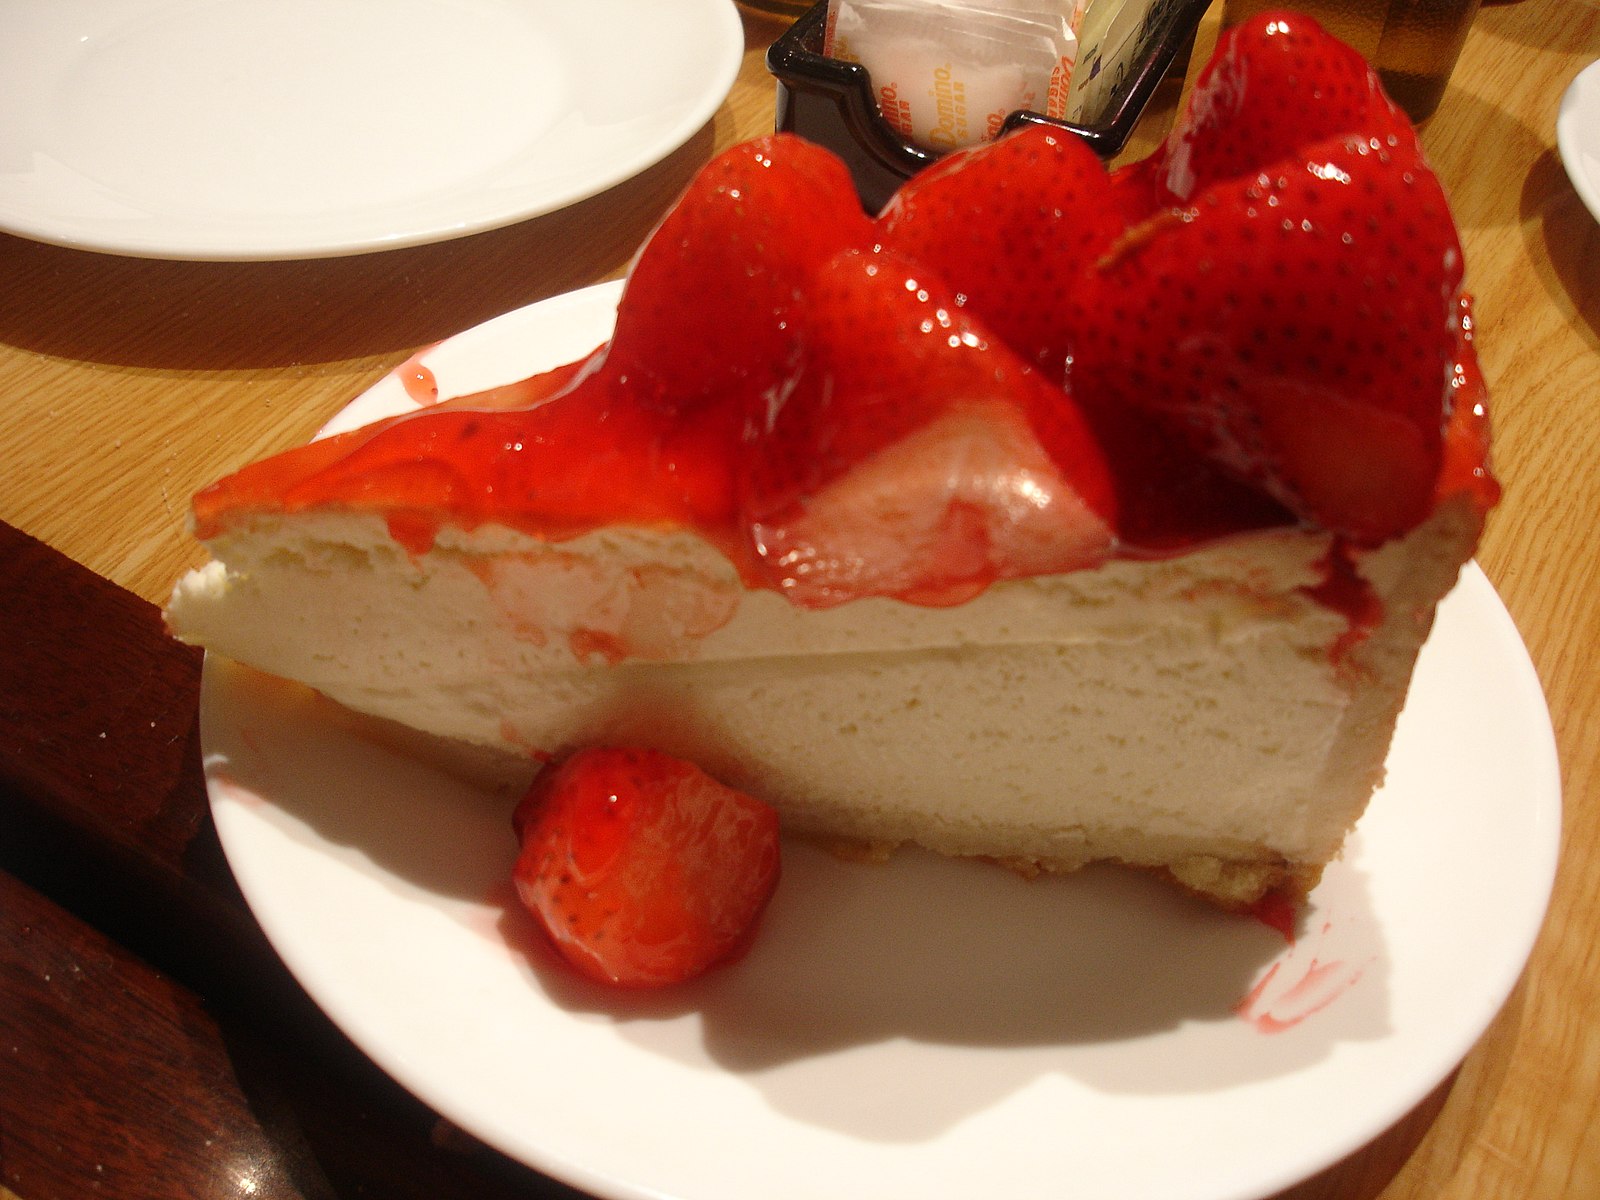 A slice of Strawberry Cheesecake from the Carnegie Deli